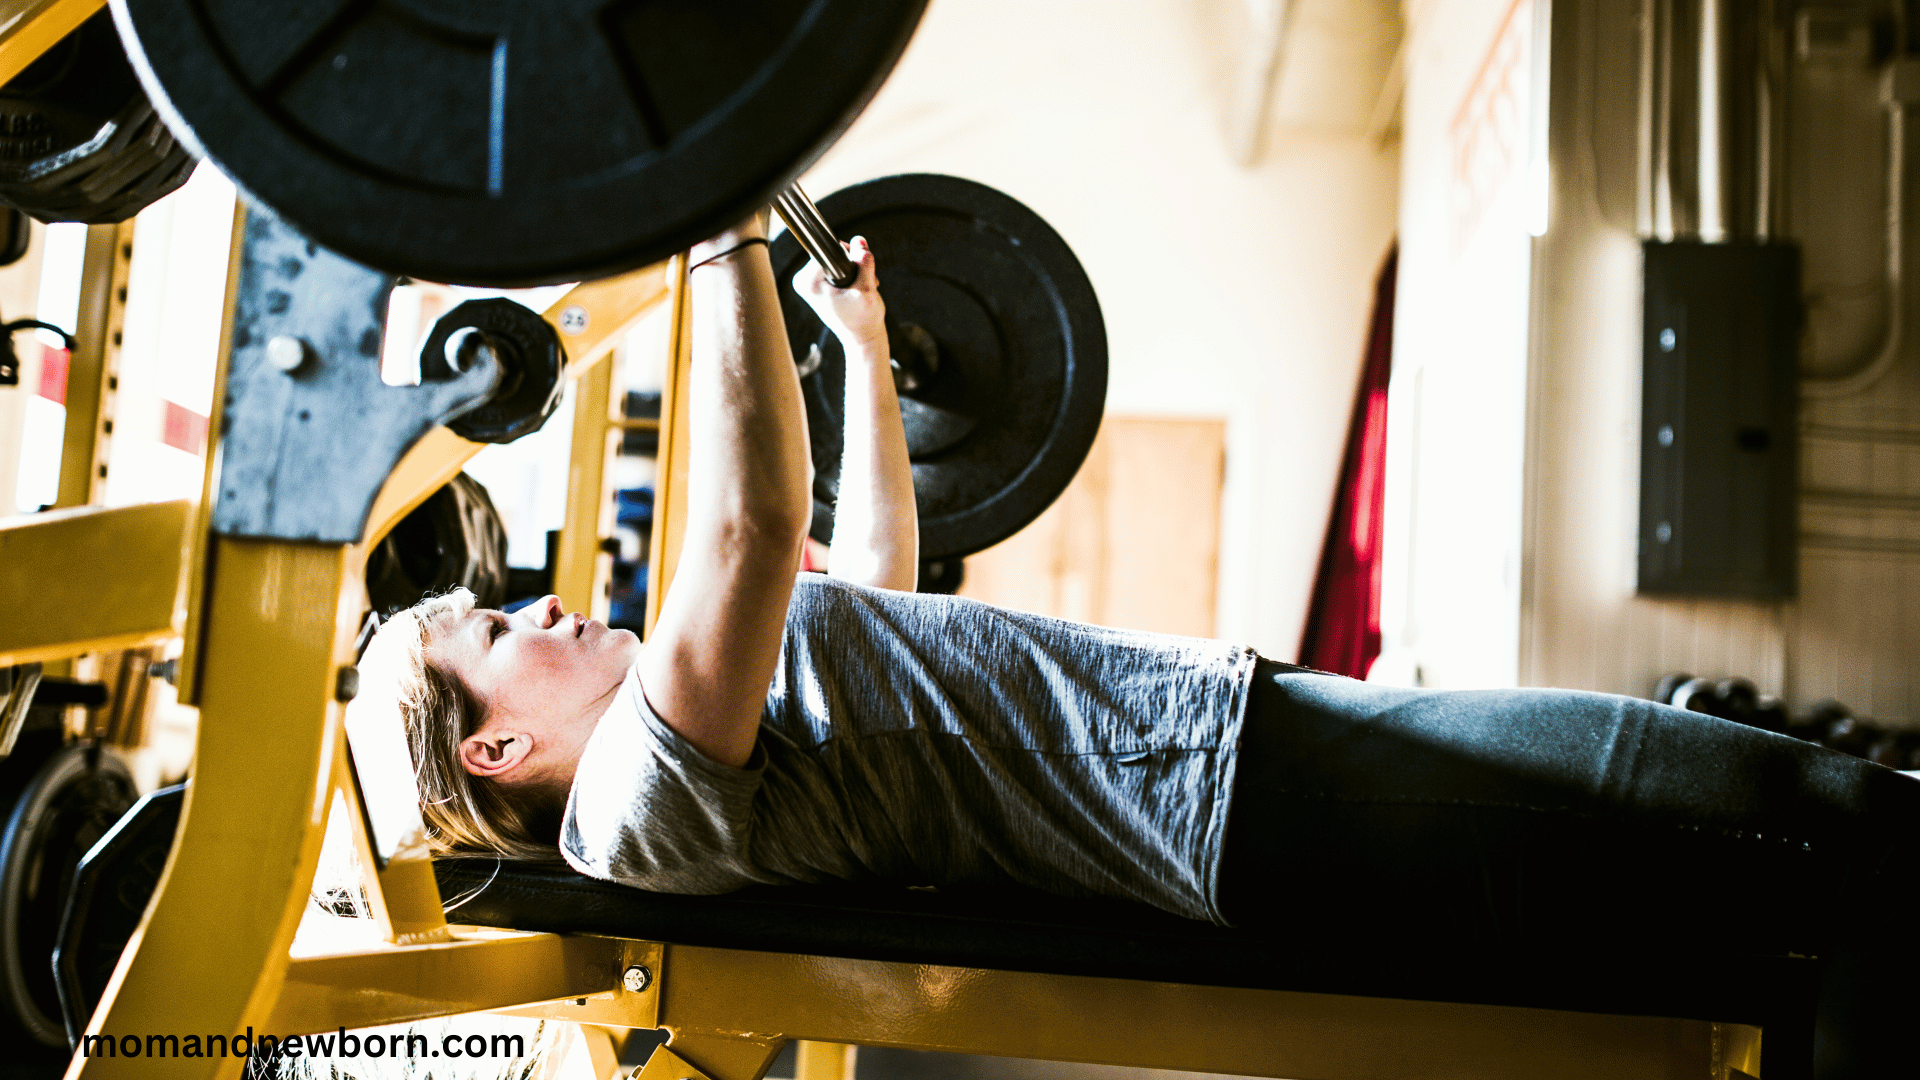 How many calories does the bench press burn?